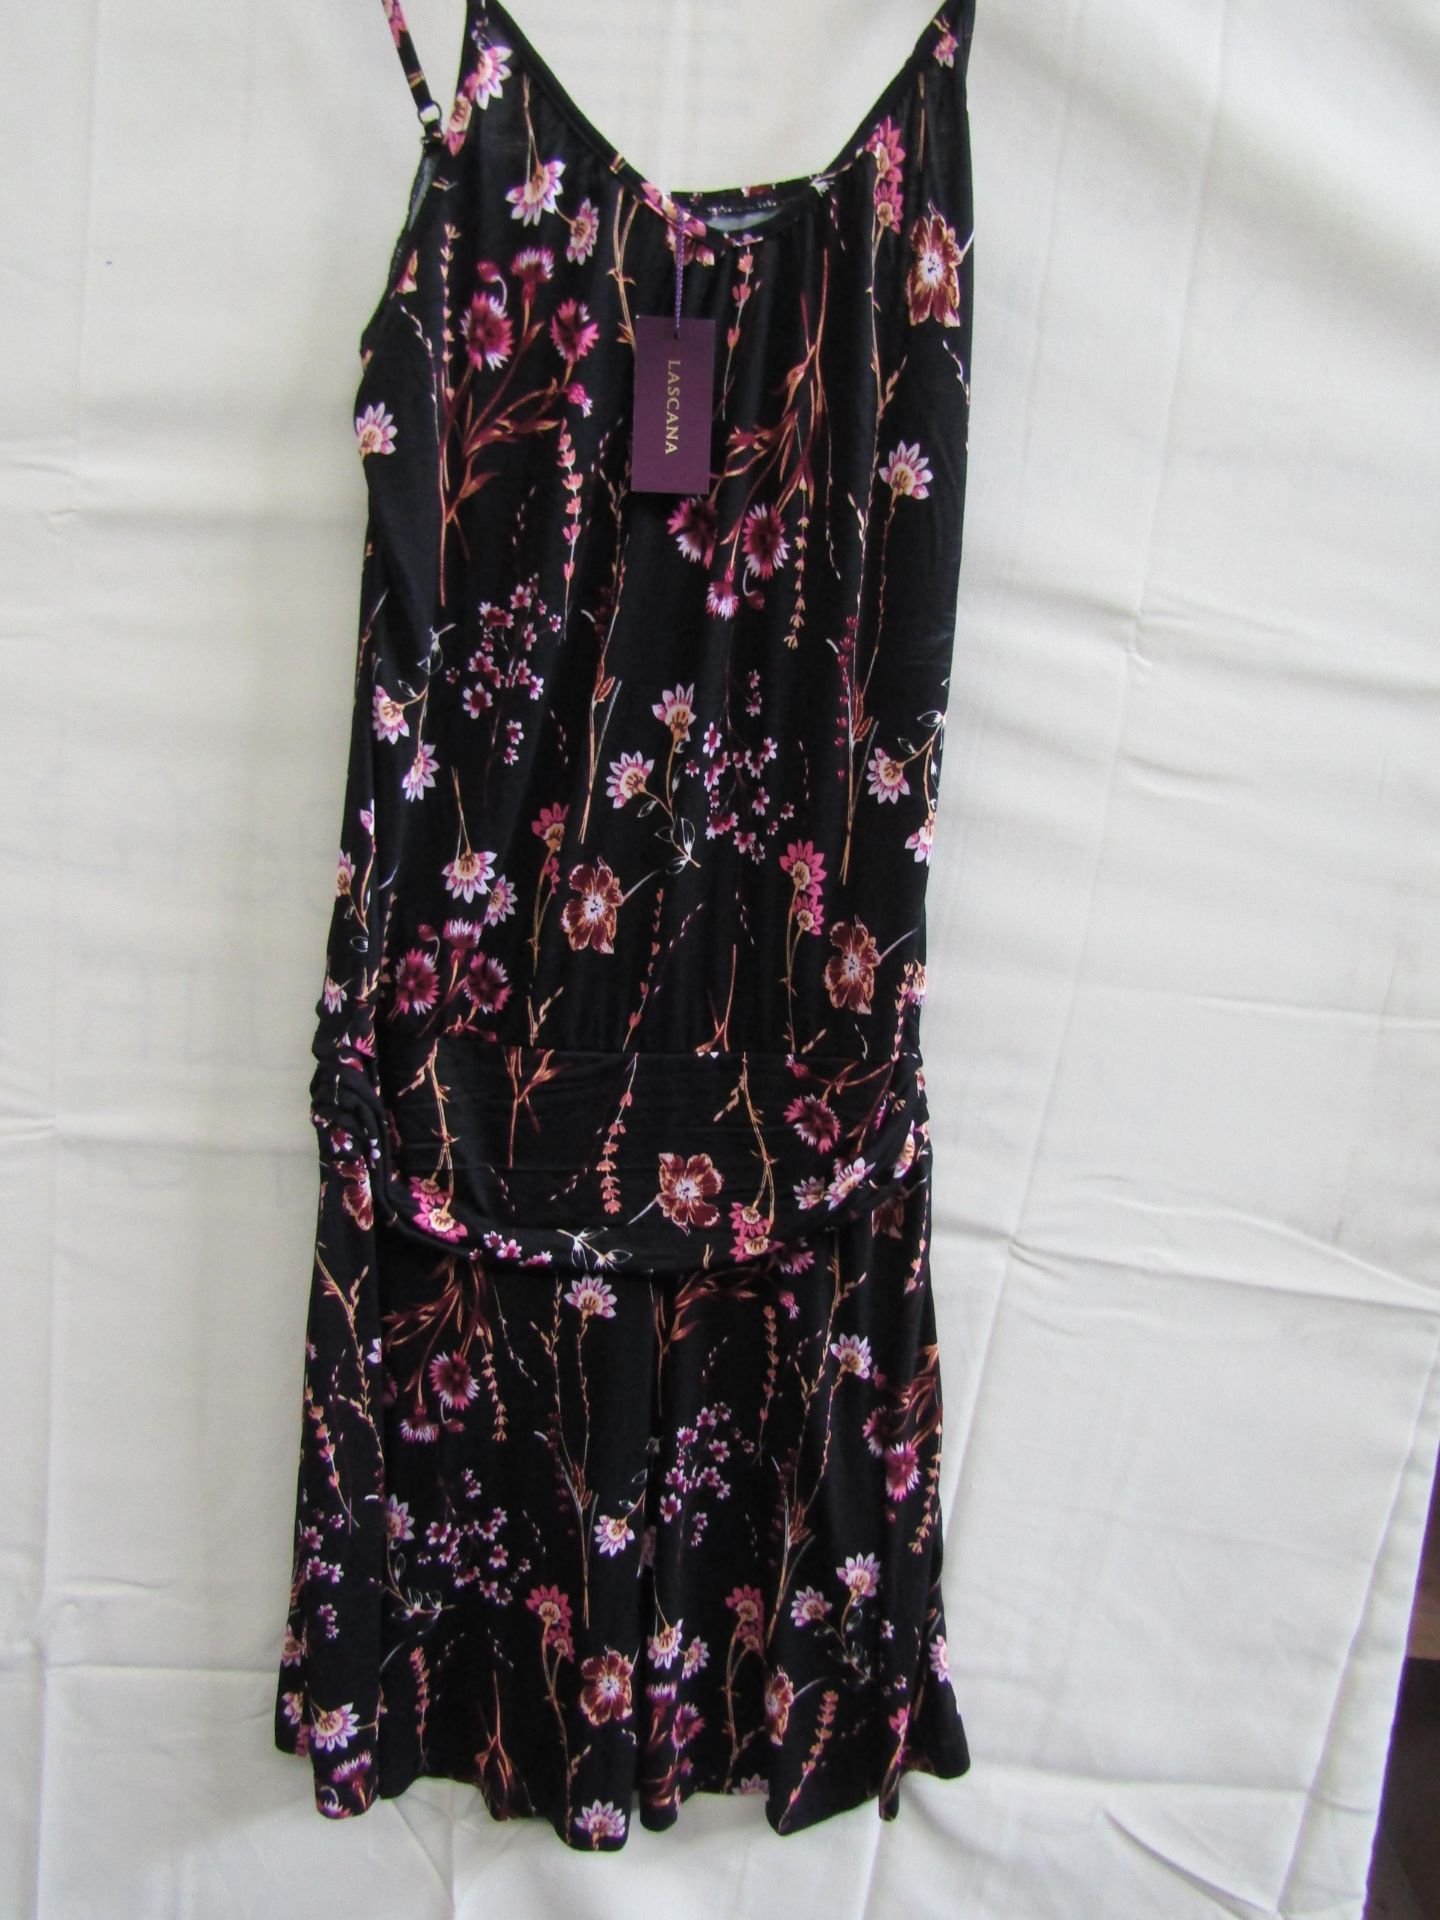 Lascana Dress With Pulled In Waist Size 40 ( May Have Been Worn ) Has Tags Attatched